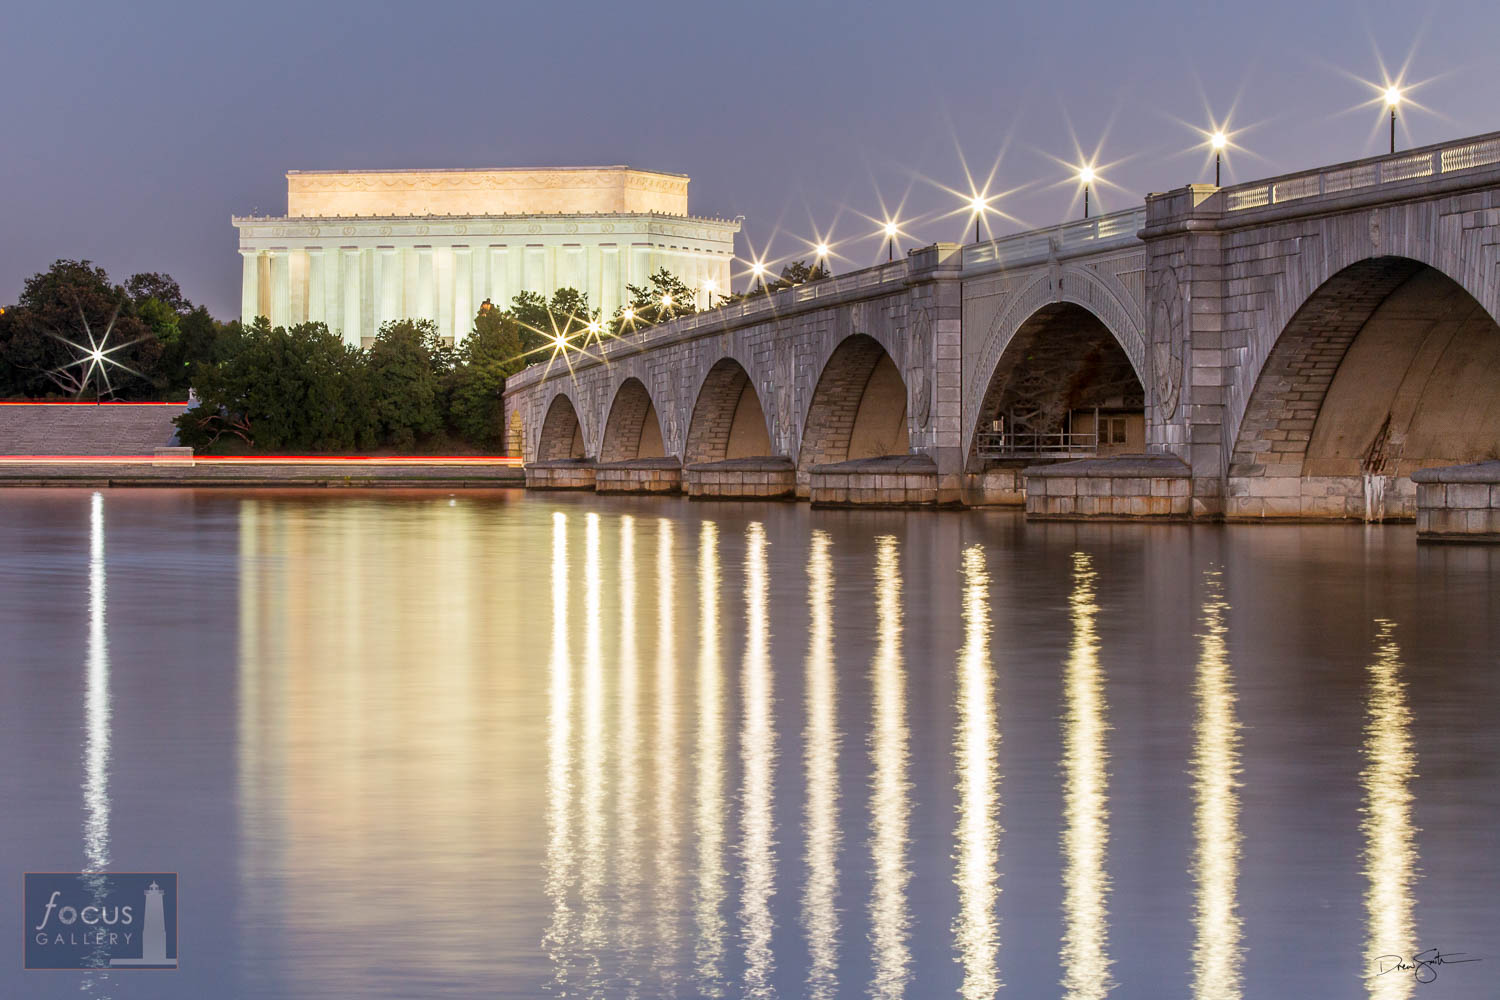 Photo © Drew Smith The Lincoln Memorial and Memorial Bridge reflect on the Potomac River at dusk.